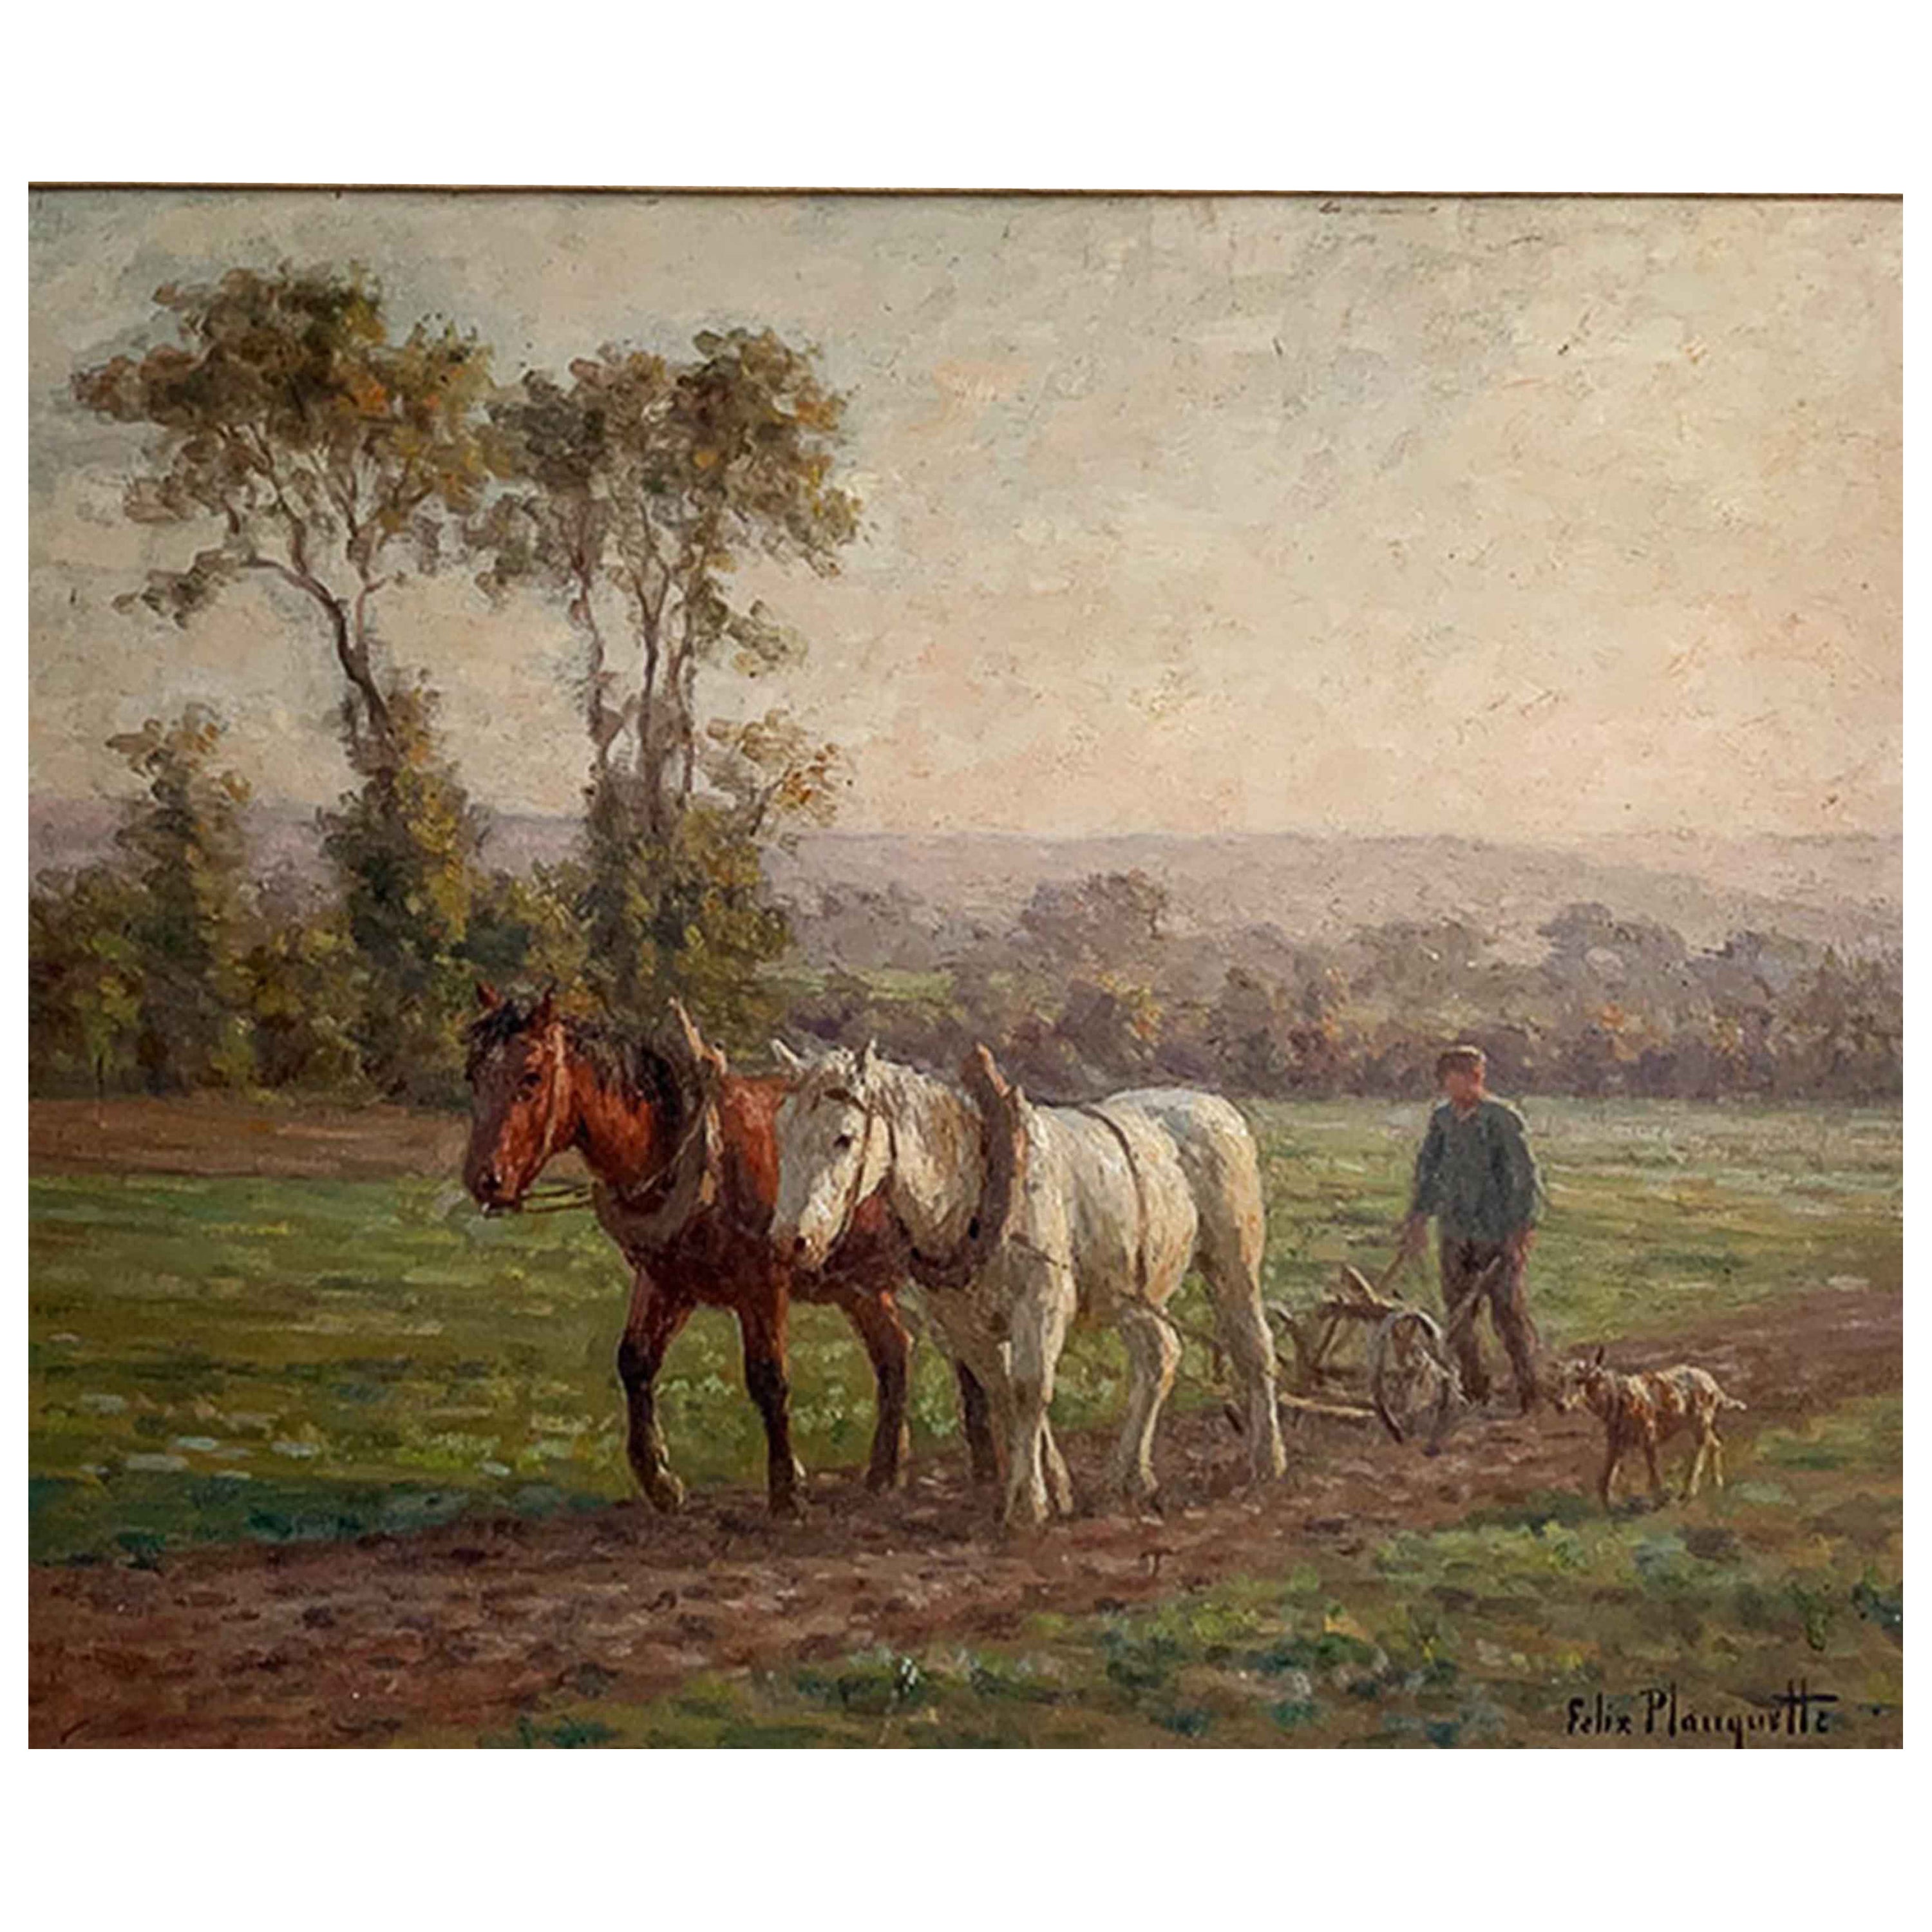 Planquette Félix "The Ploughing" Panel For Sale